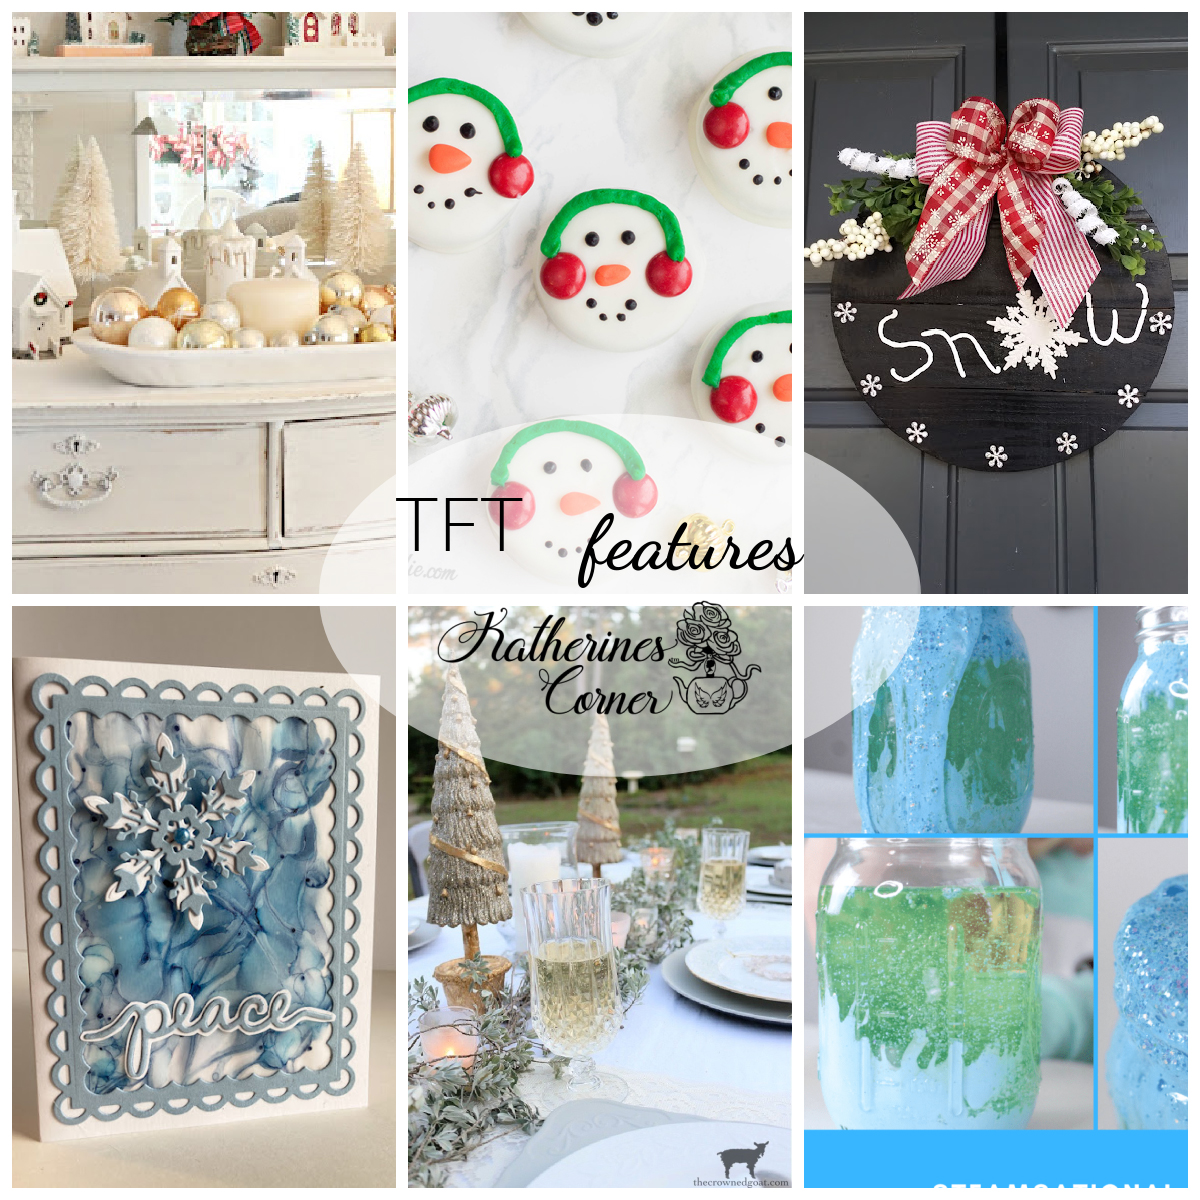 Let It Snow and TFT Blog Hop